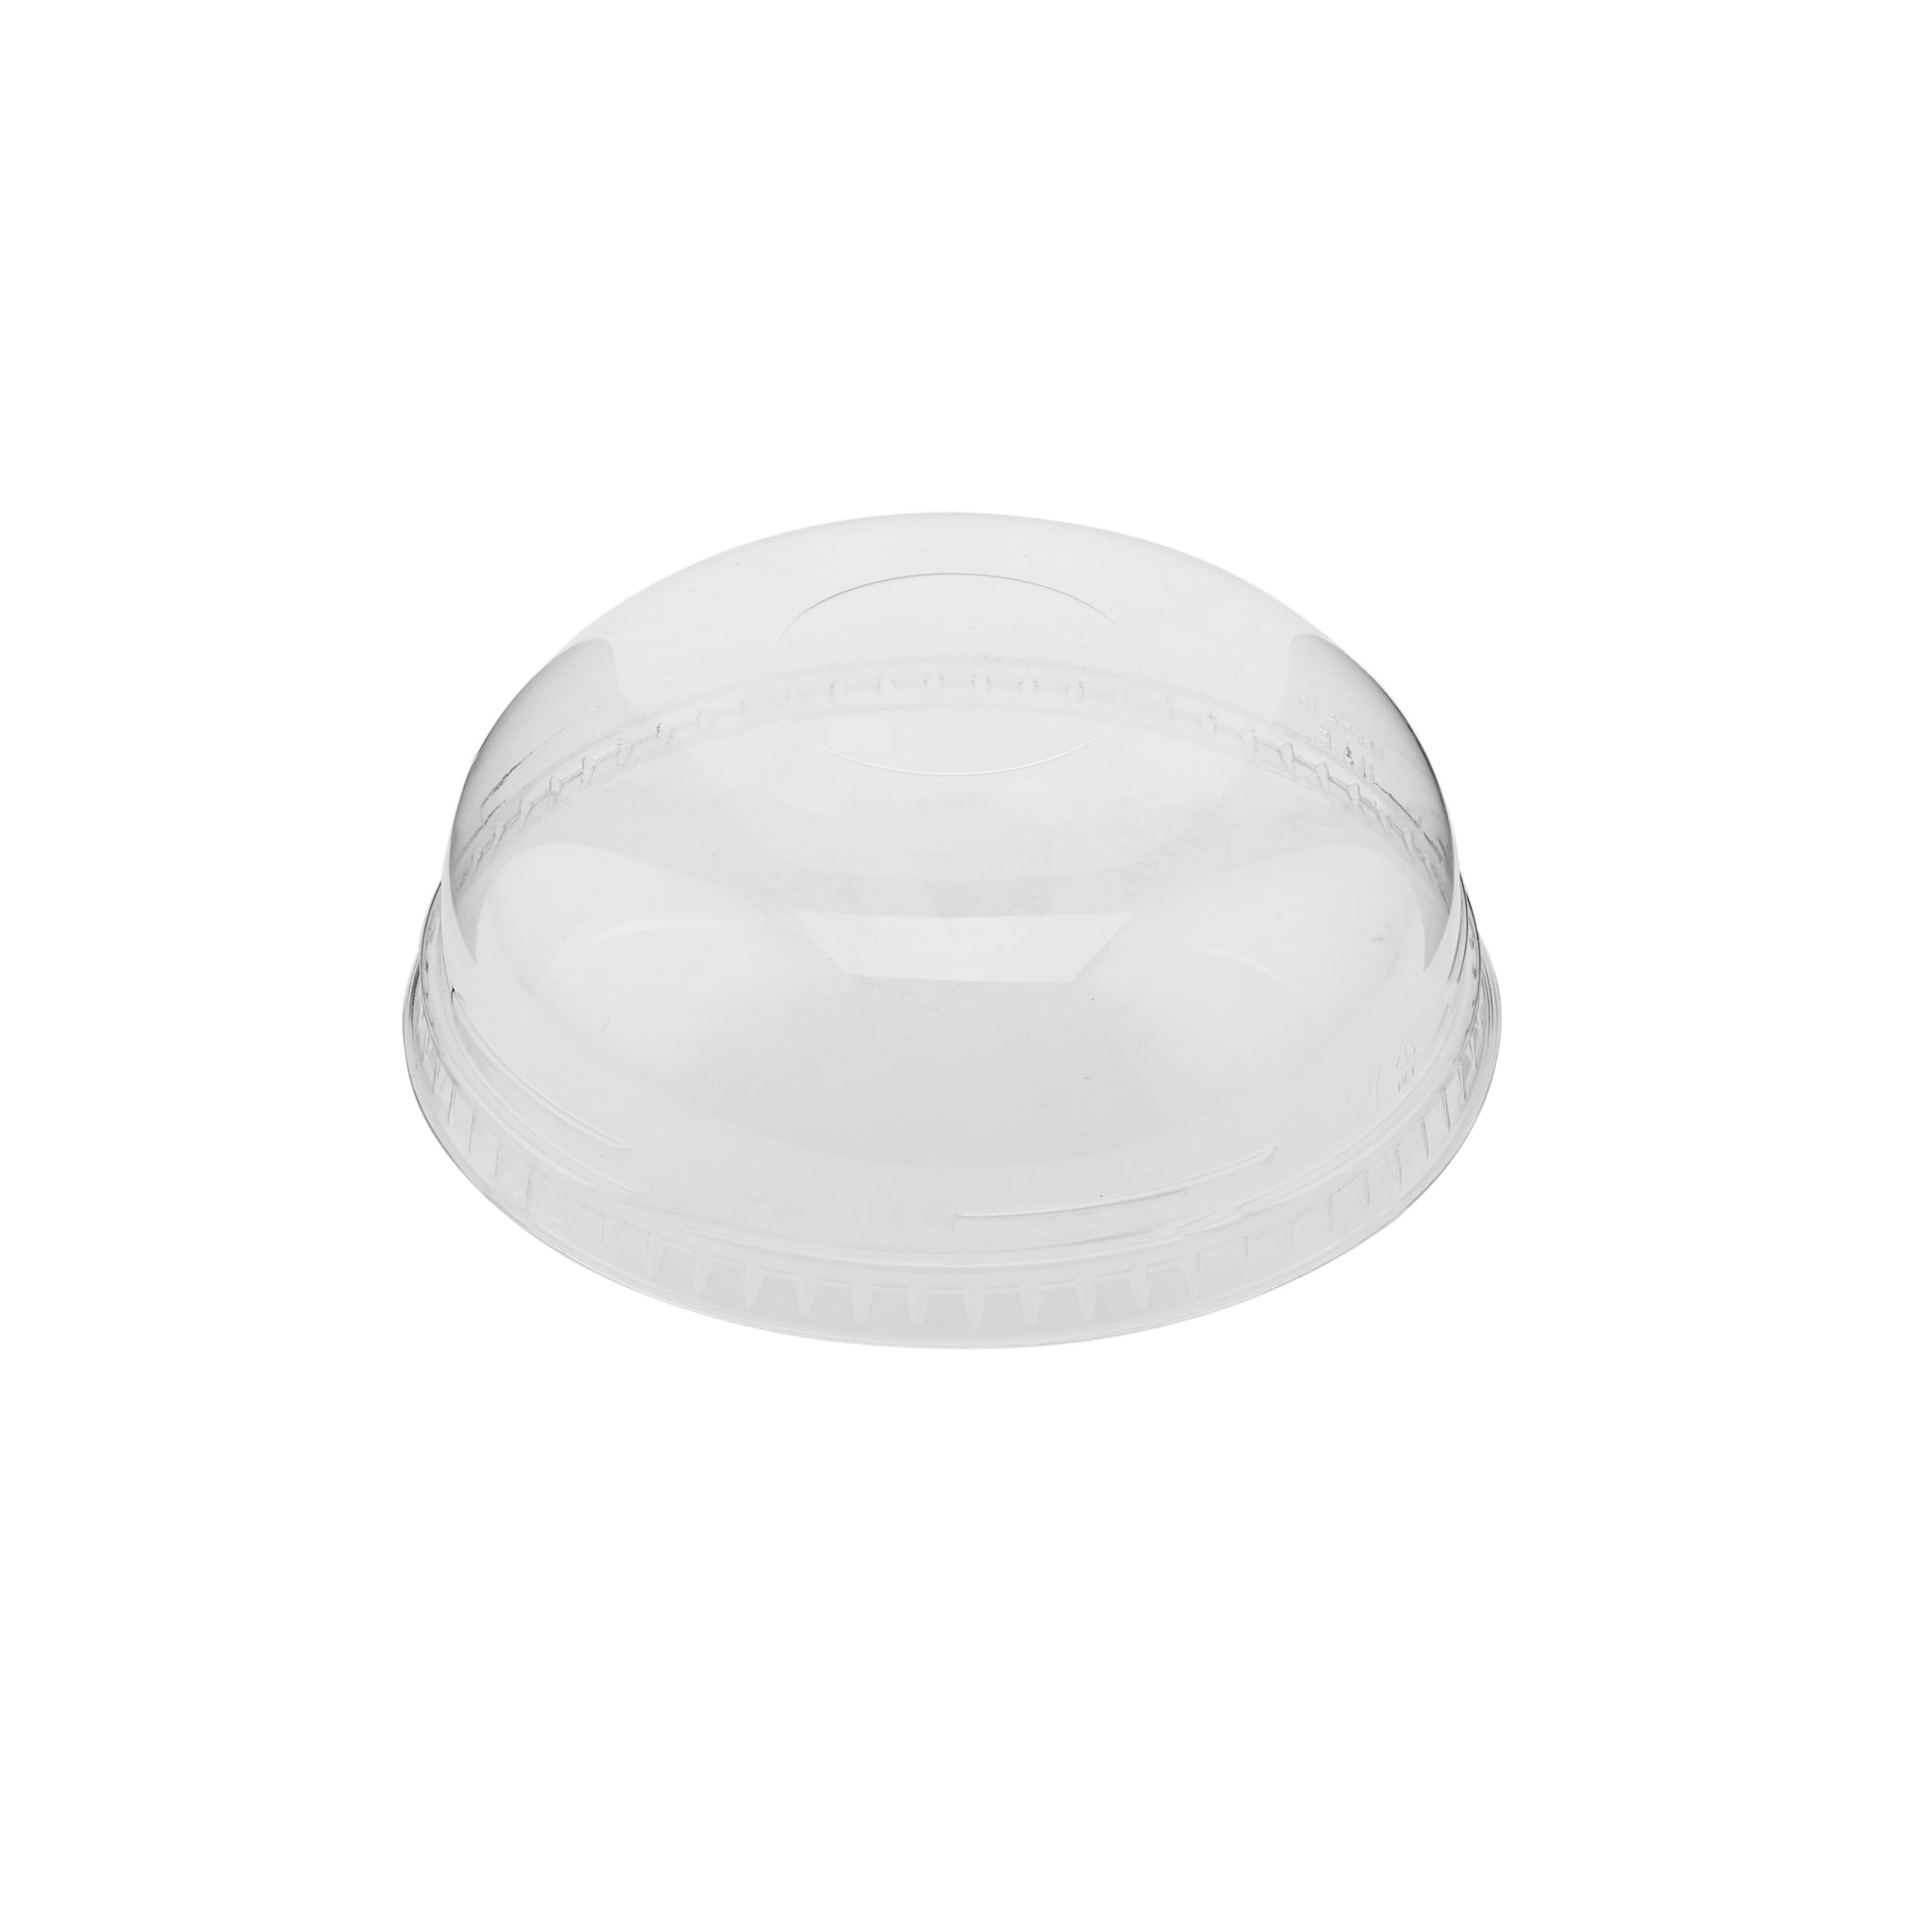  Dome Lid for Deli Containers 